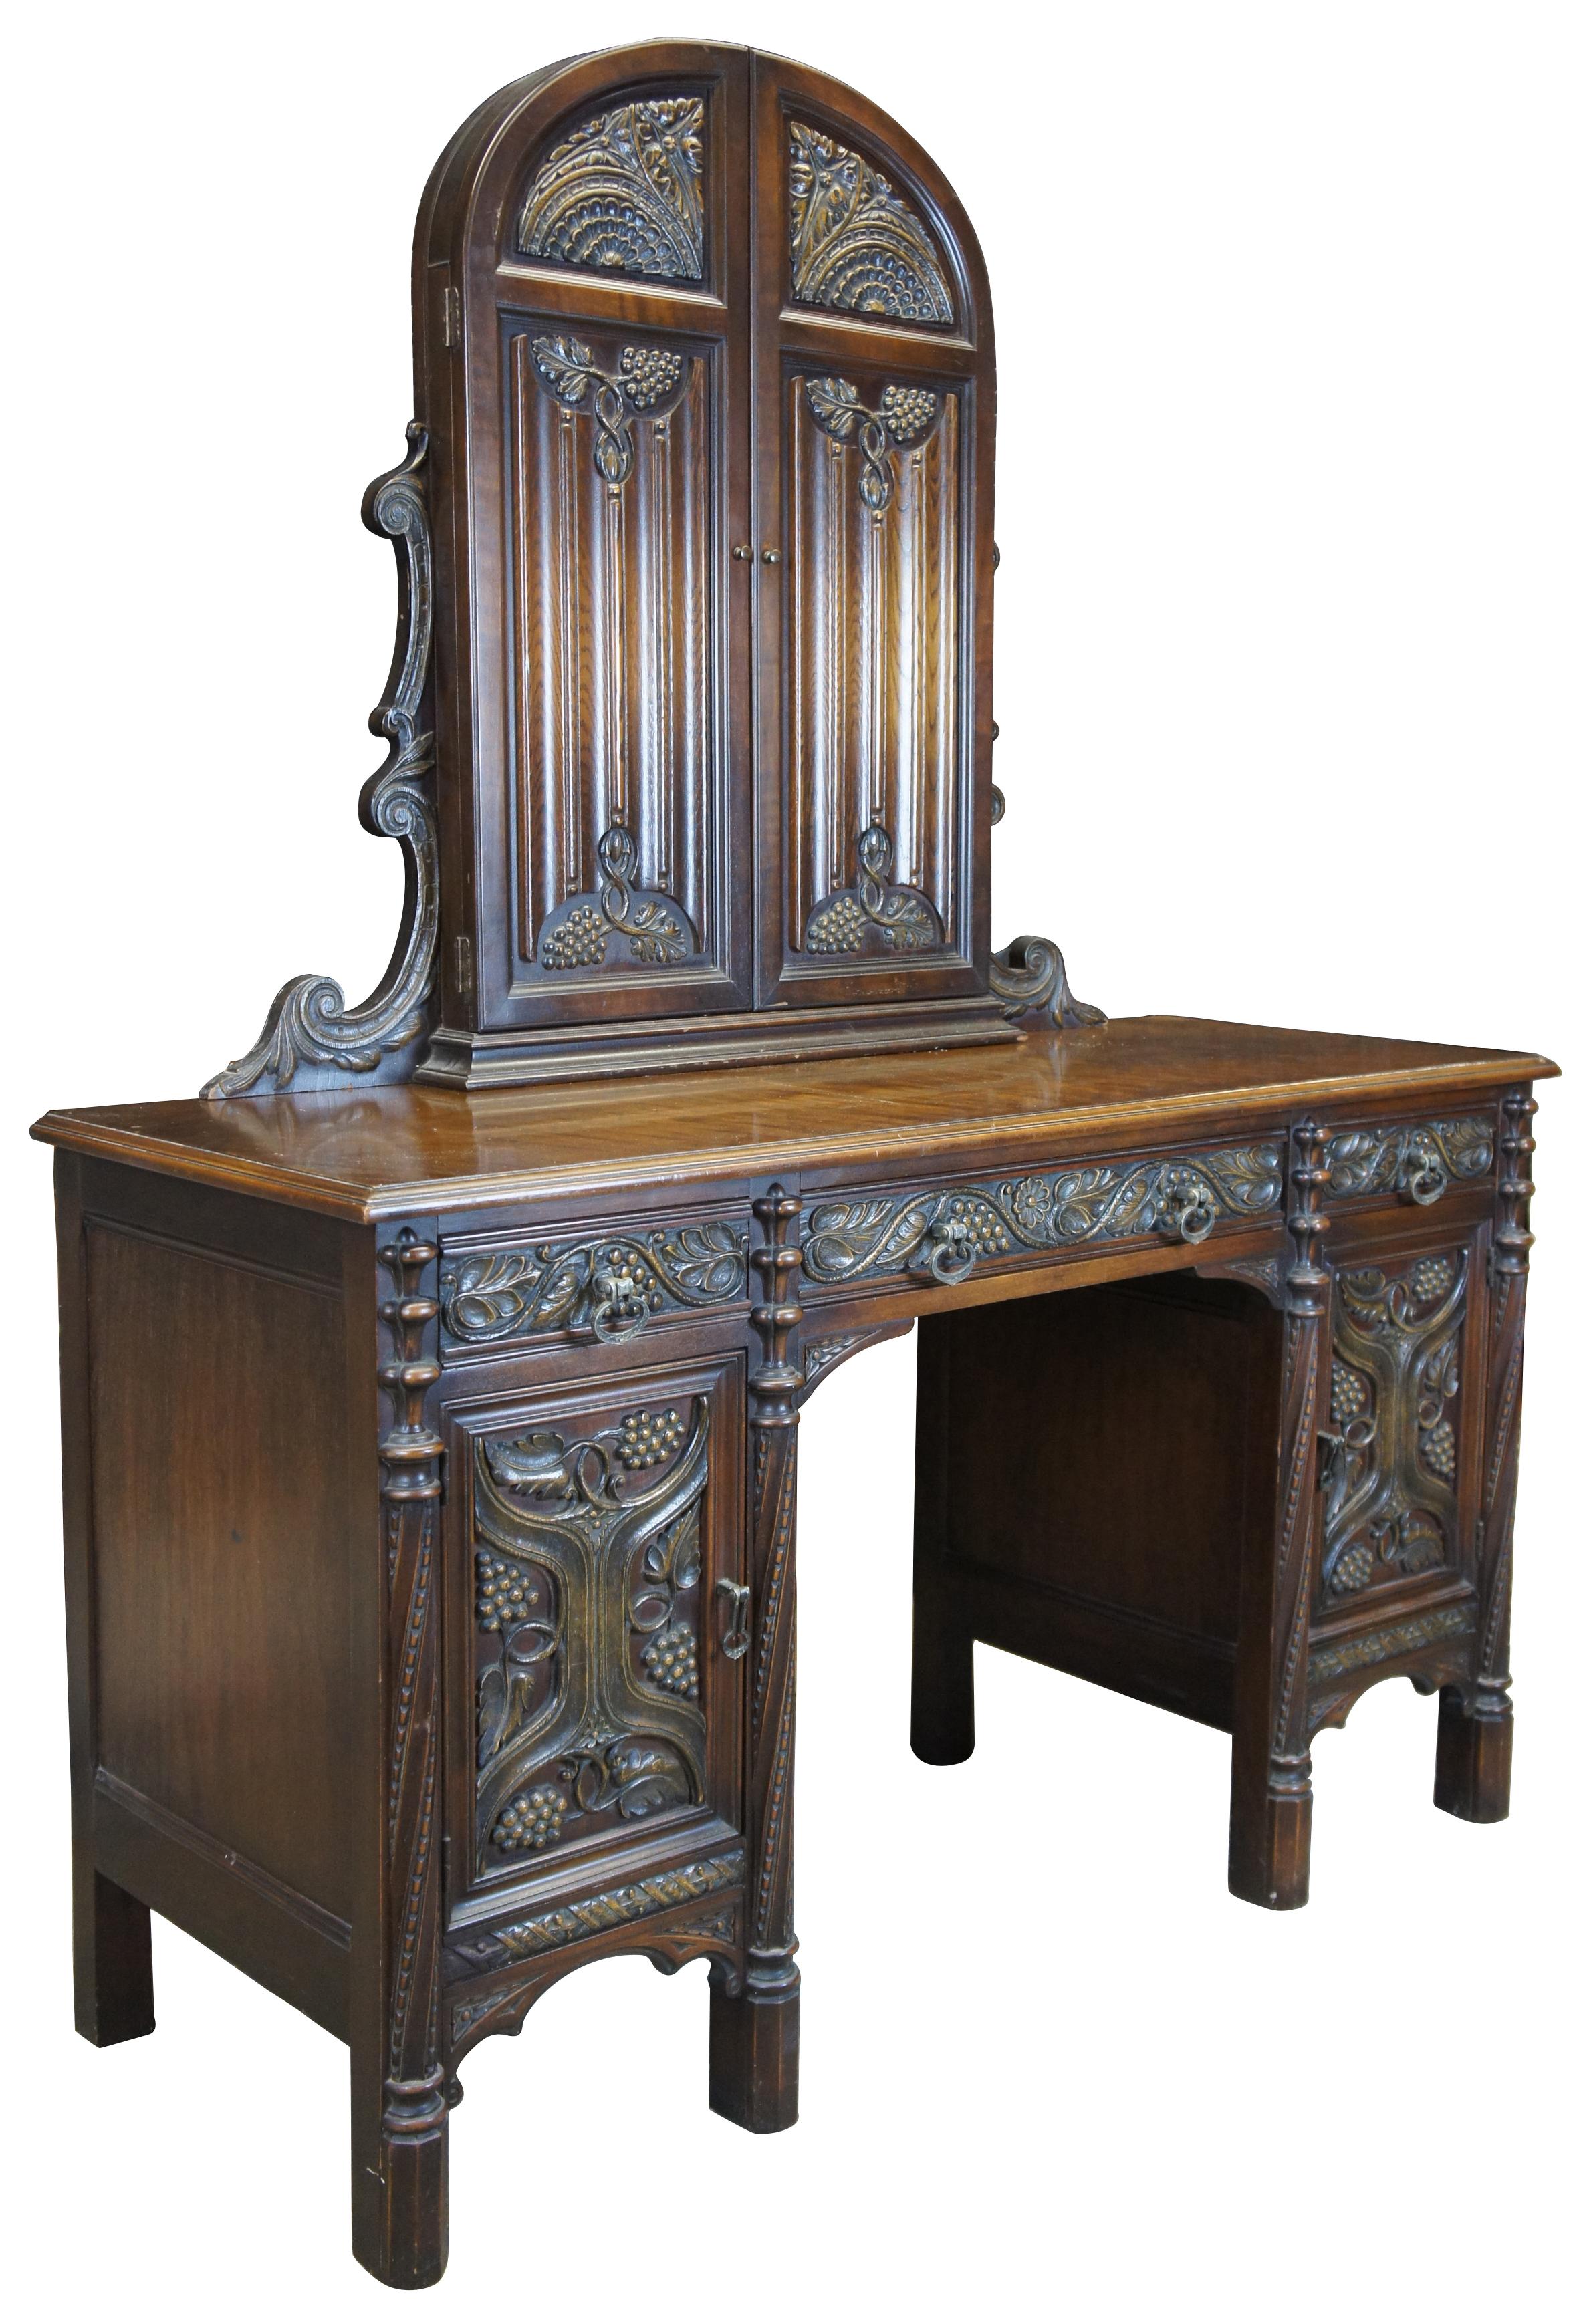 American Furniture Company Gothic or Spanish Renaissance Revival vanity desk and mirror. Operating out of Batesville Indiana since 1899, they worked closely and collaborated in part with Romweber. Specializing in high grade bedroom suites and